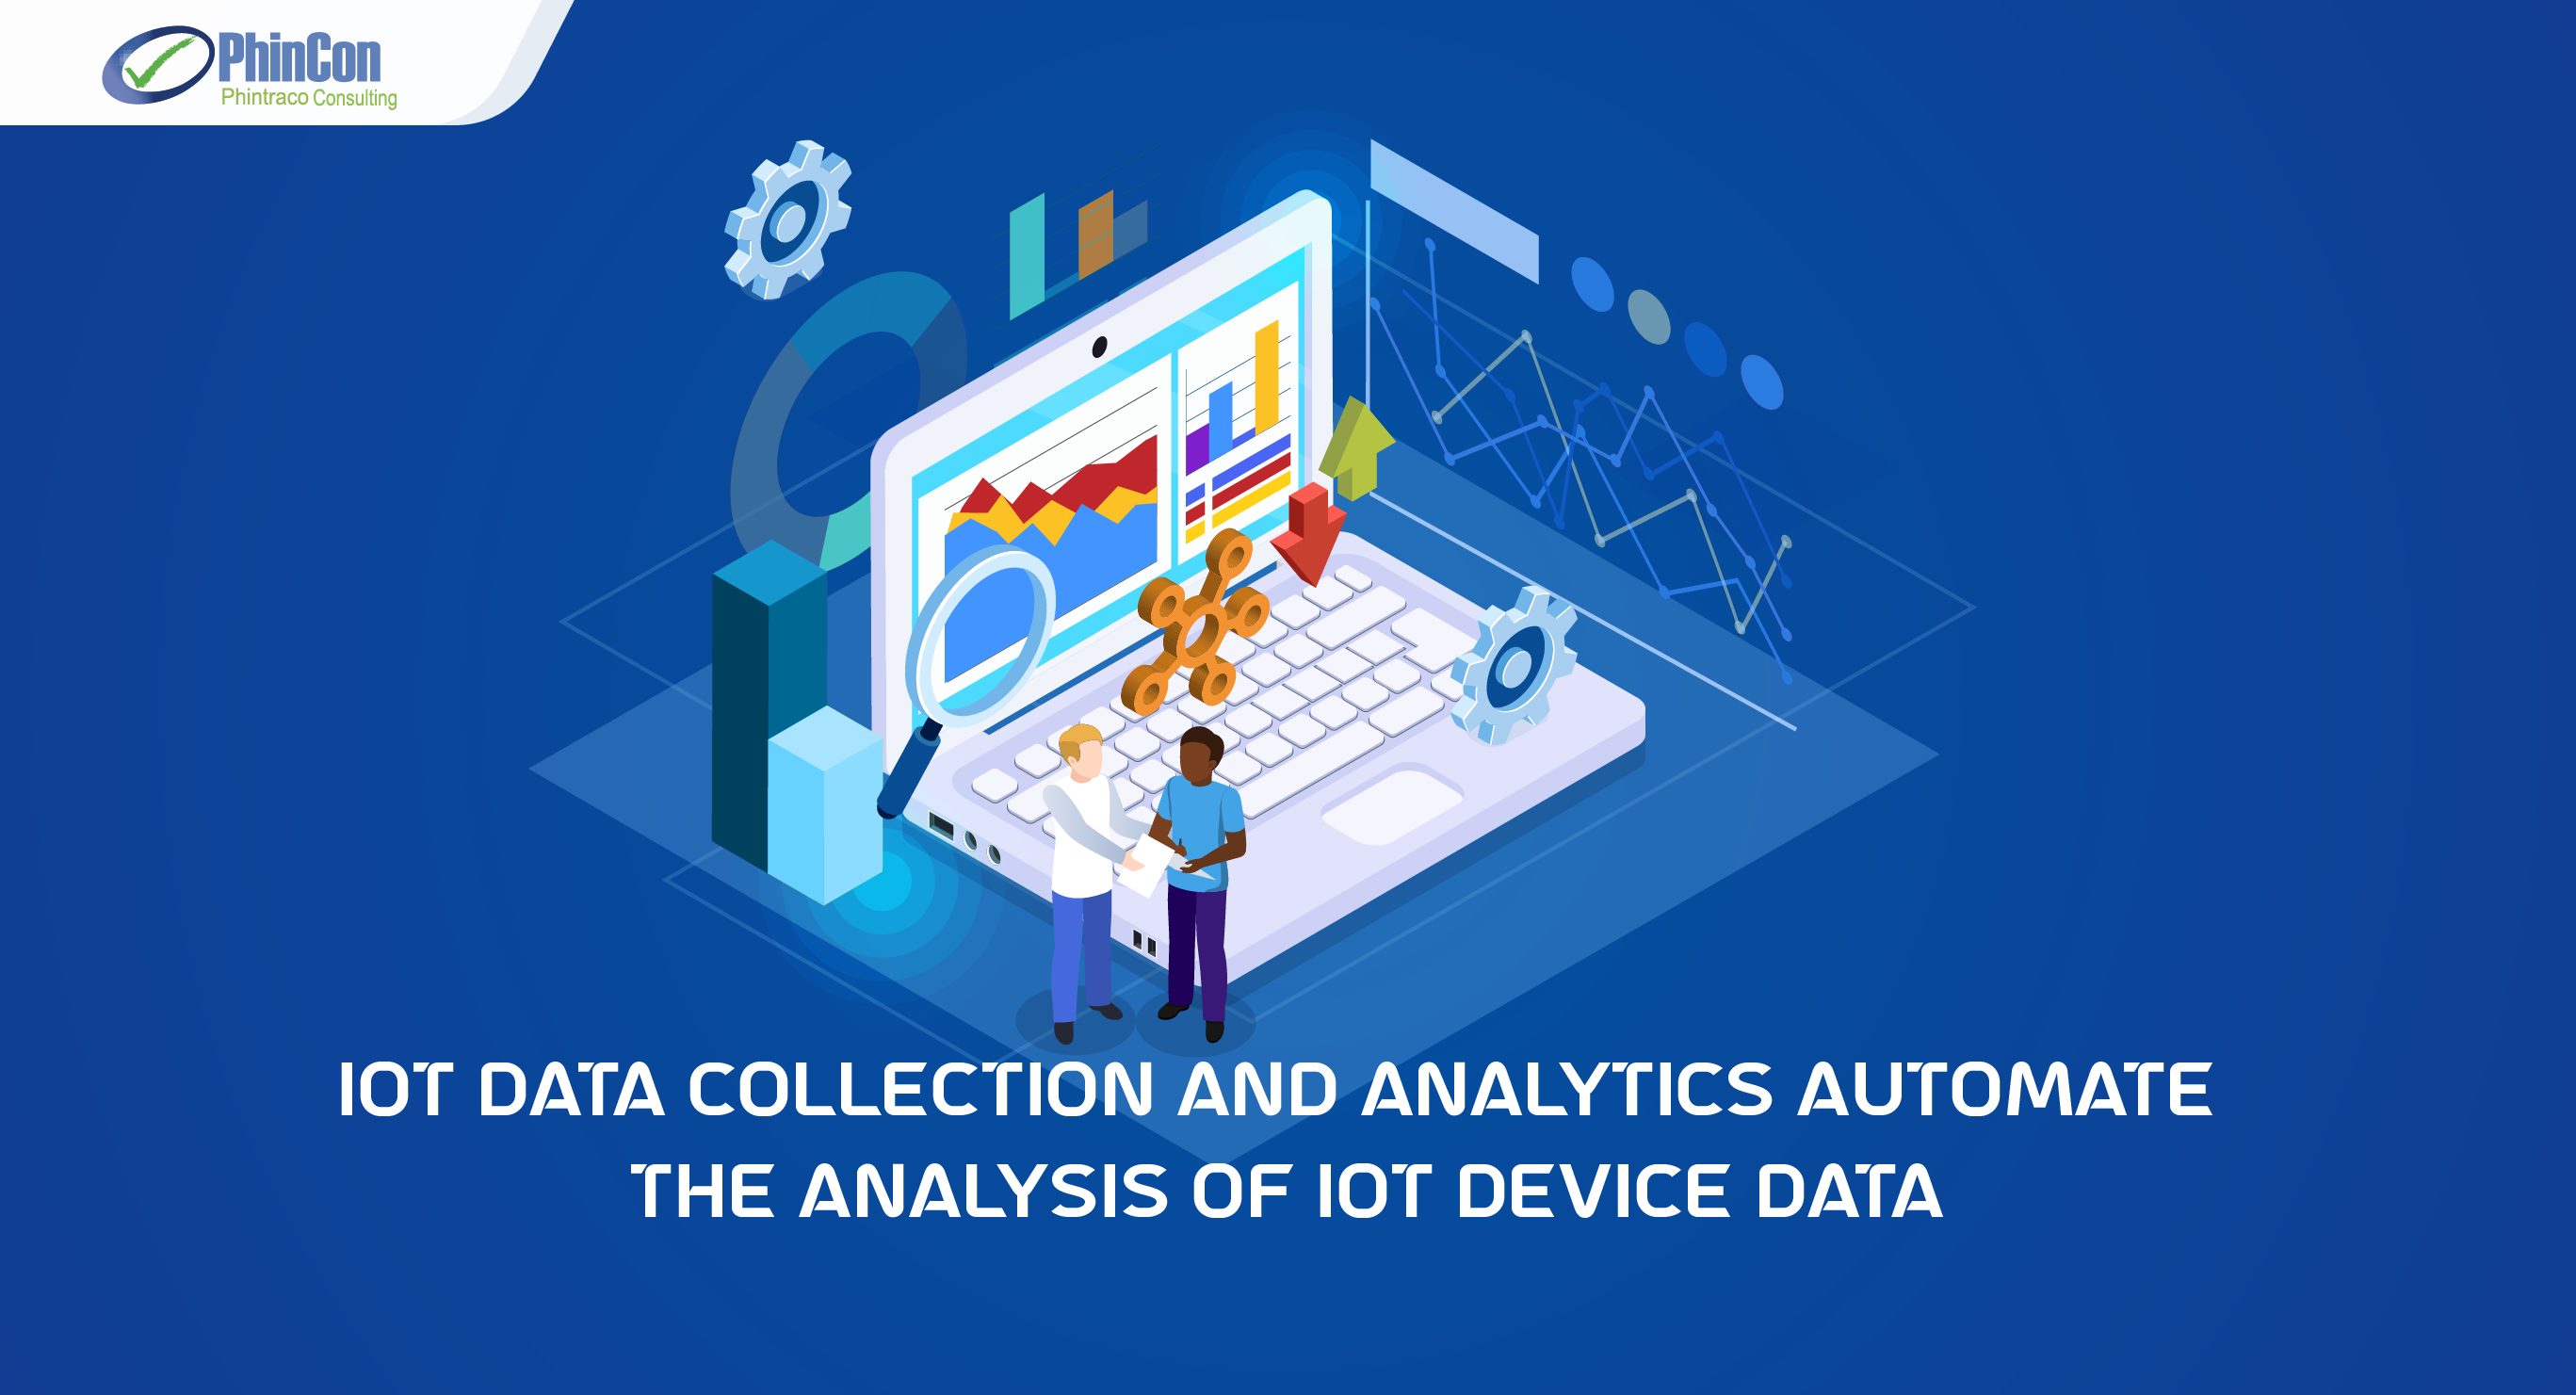 IoT Data Collection and Analytics Automate the Analysis of IoT Device Data